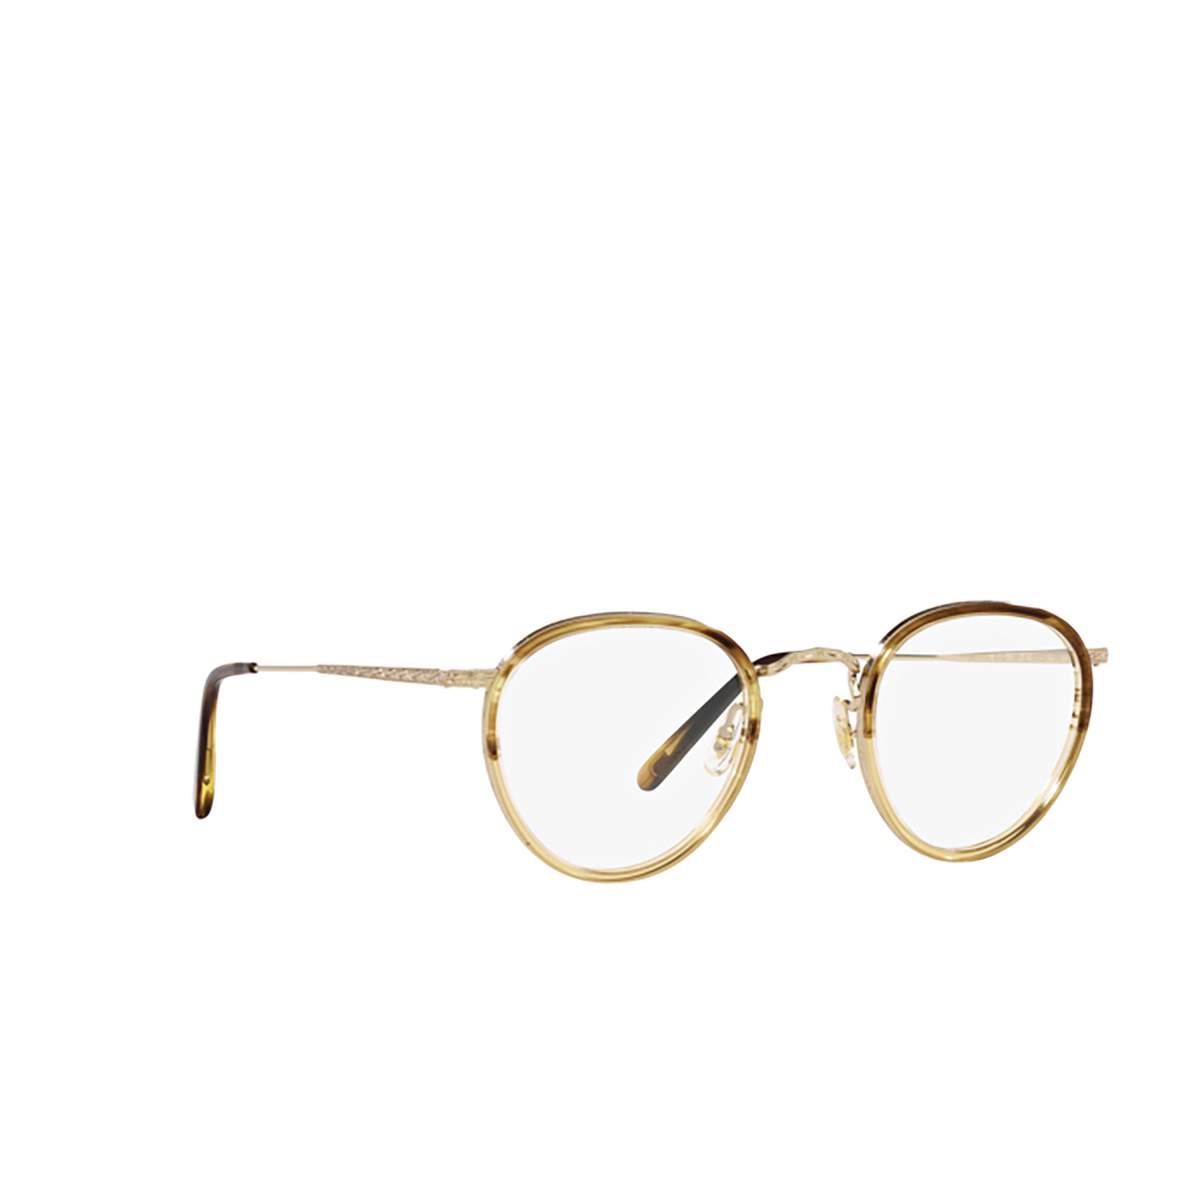 Oliver Peoples MP-2 Eyeglasses 5330 Canarywood Gradient / Gold - three-quarters view